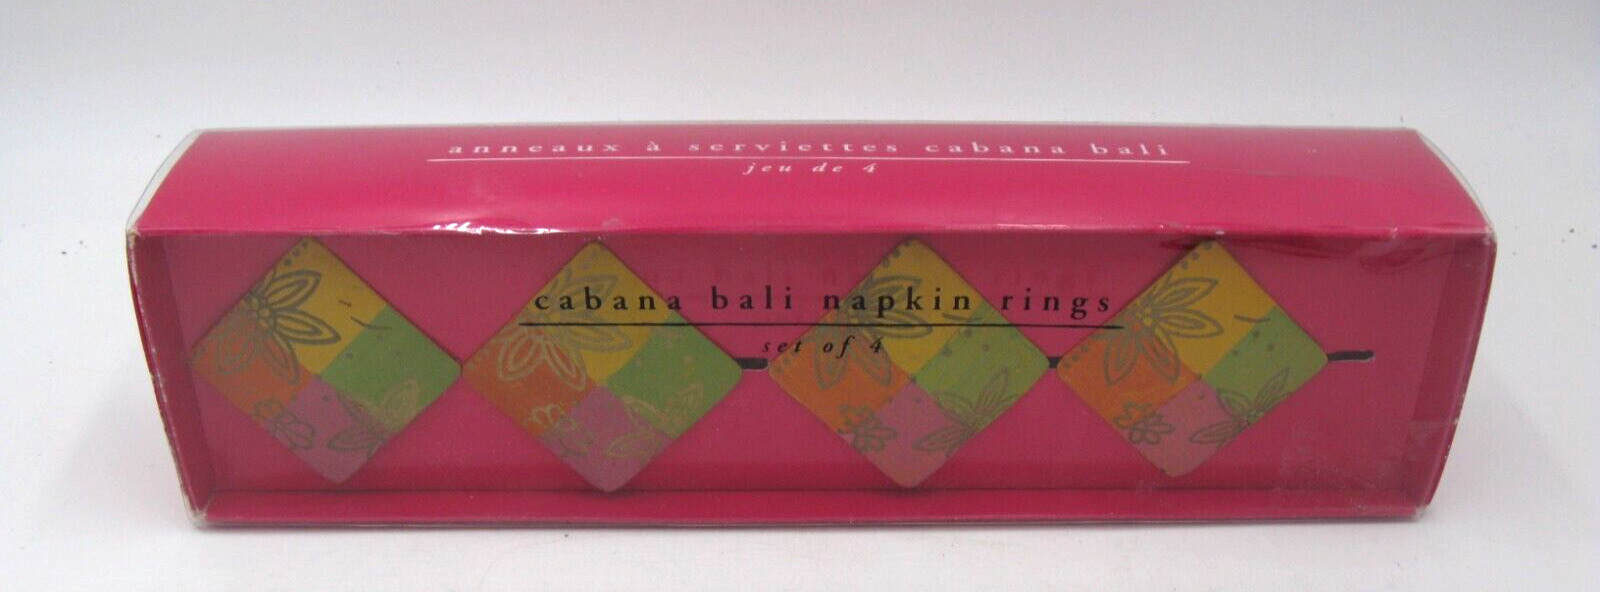 PIER 1 Napkin Rings Set Of 4 Cabana Bali Discontinued Square NEW IN BOX